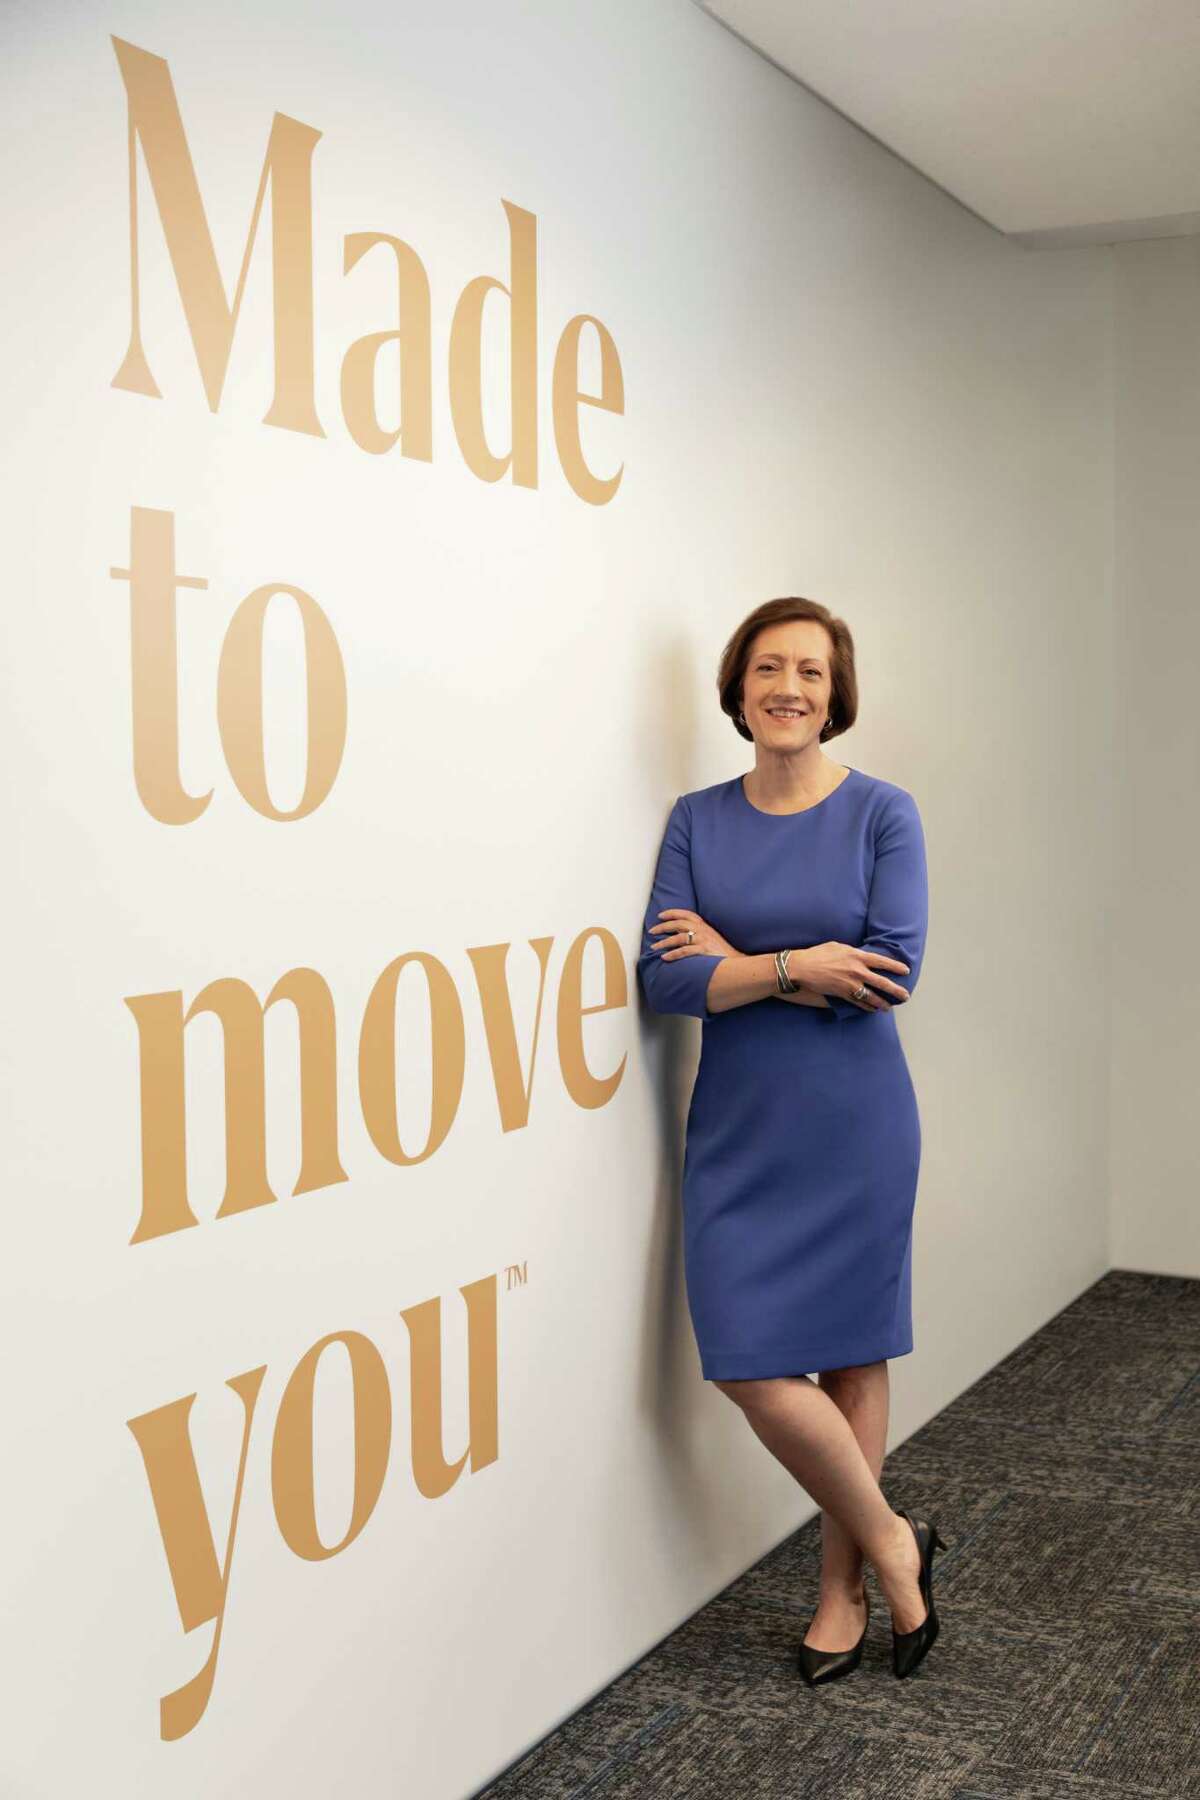 Judy Marks is chief executive officer, president and chairwoman of Farmington-based Otis Worldwide, one of the world’s largest makers and servicers of elevators, escalators and moving walkways. She is the only woman to currently serve as CEO of a Fortune 1,000 company headquartered in Connecticut.